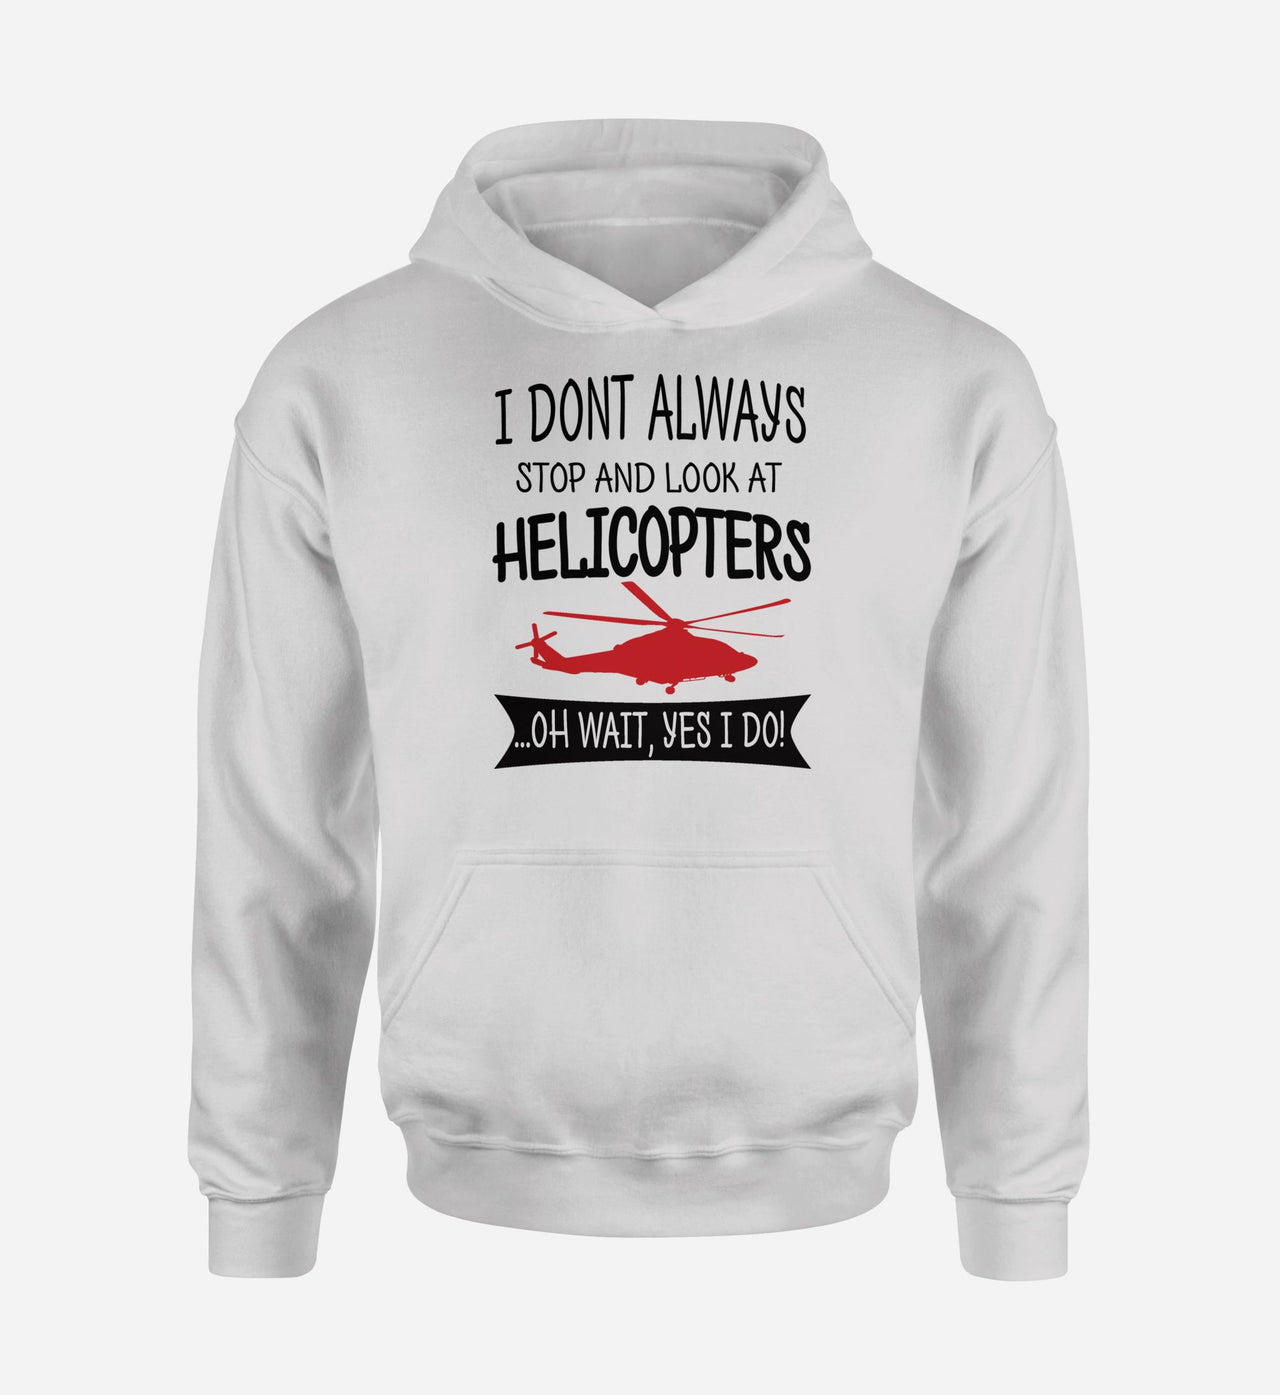 I Don't Always Stop and Look at Helicopters Designed Hoodies